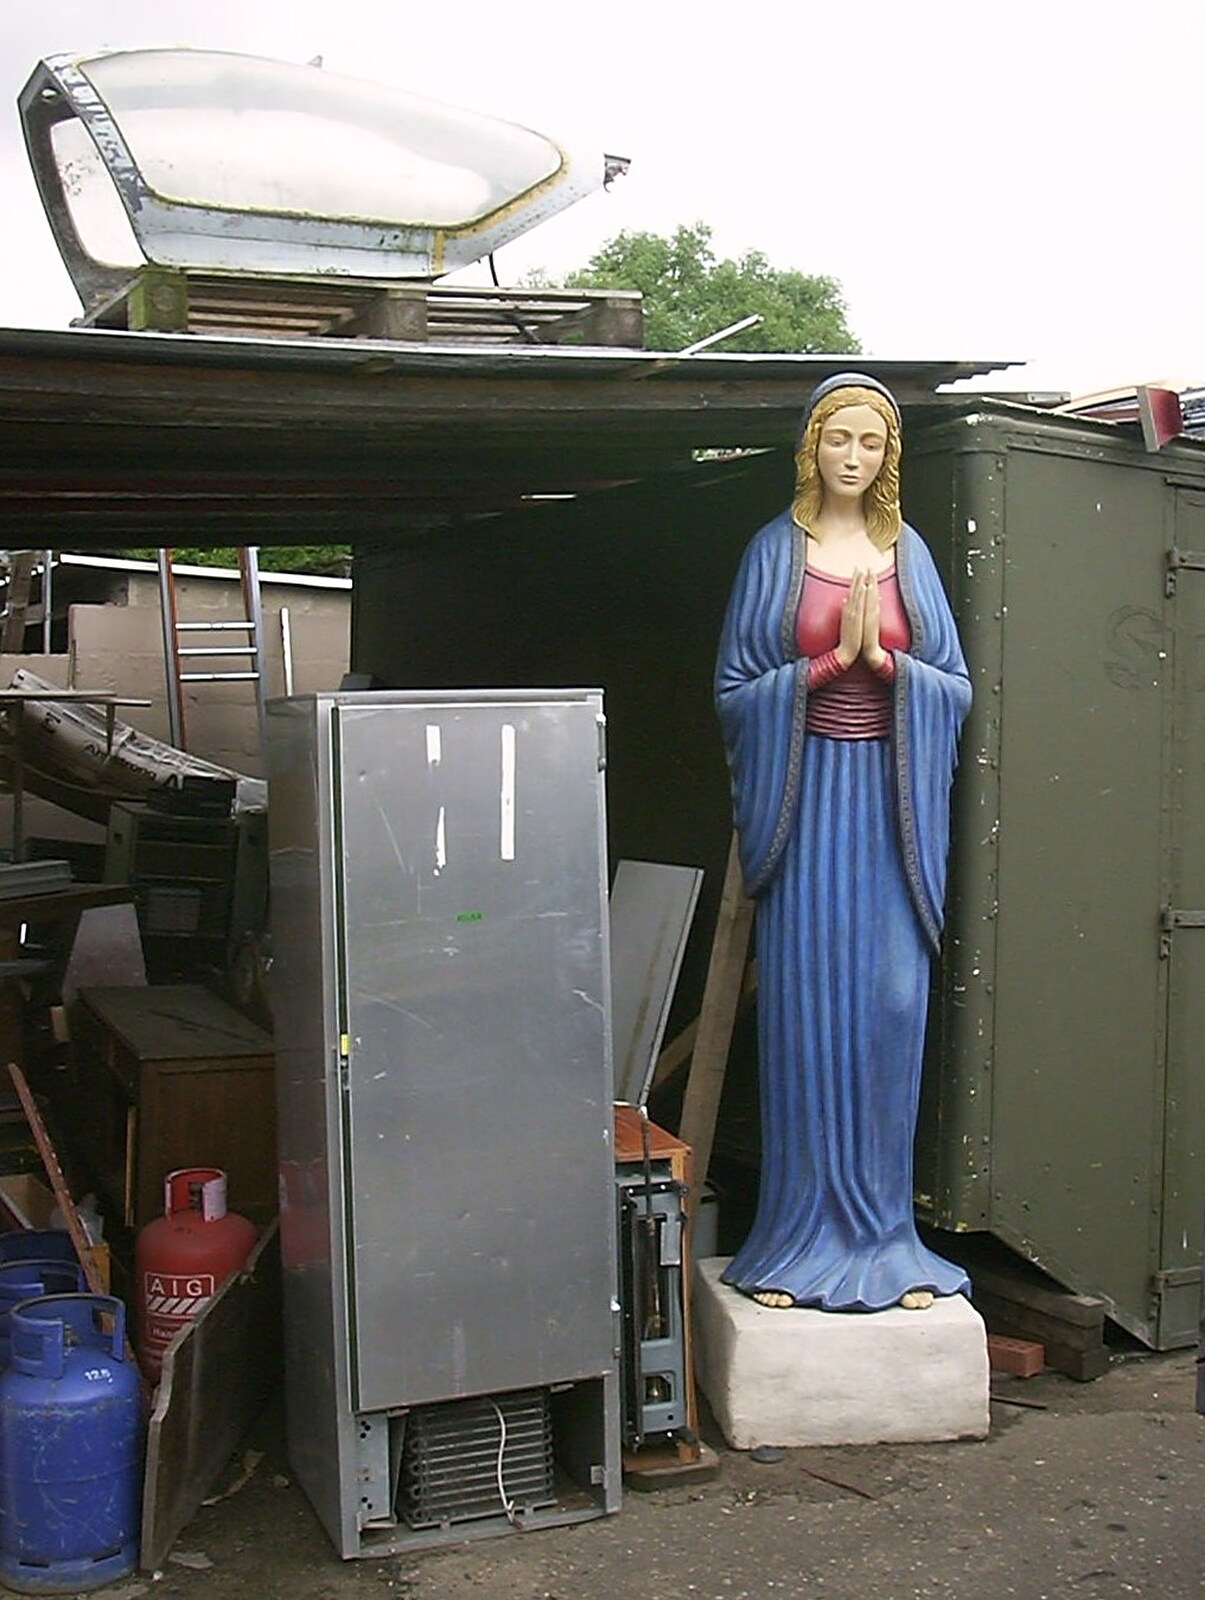 The Scary Mary statue at Pete Gillings from A Hard-Drive Clock and Other Projects, Brome, Suffolk - 28th June 2002